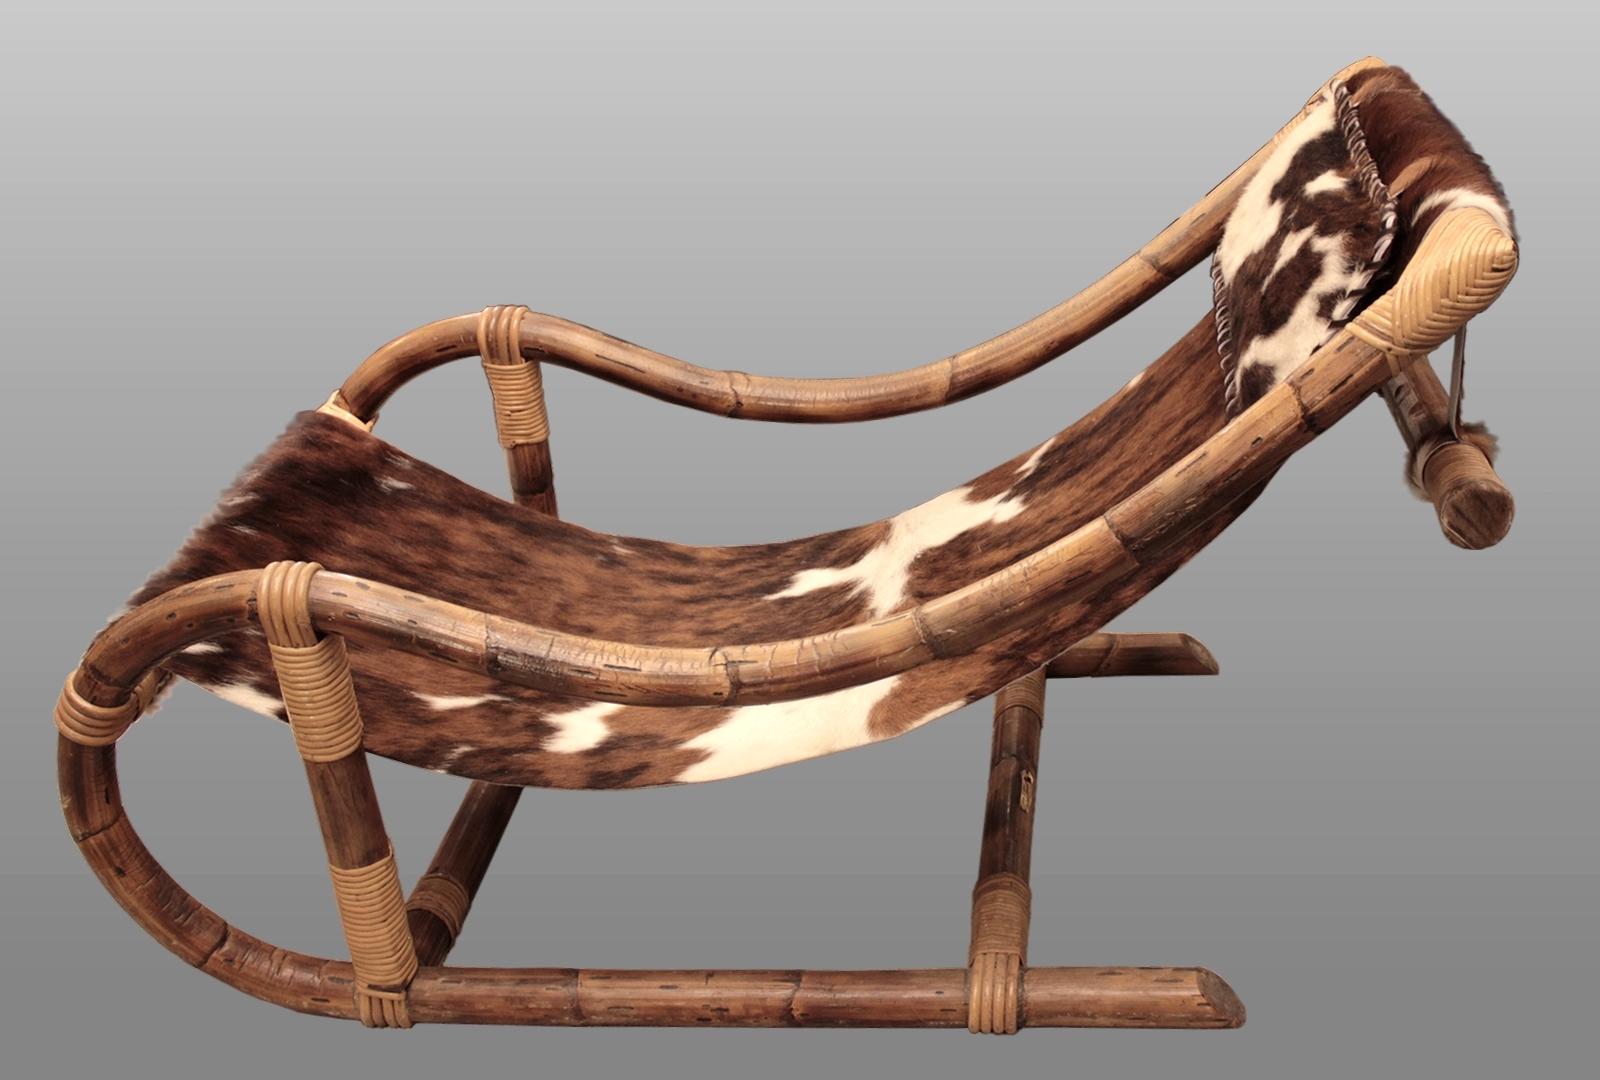 Lounge chair and footstool by Adrien Audoux and Frida Minnet
Golfe Juan, France, circa 1950.
Made of hot-formed bamboo and rattan, trimmed with natural cowhide

Armchair dimensions:
Length 44.88 in
Width 24.41 in
Seat depth 26.4 in
Backrest